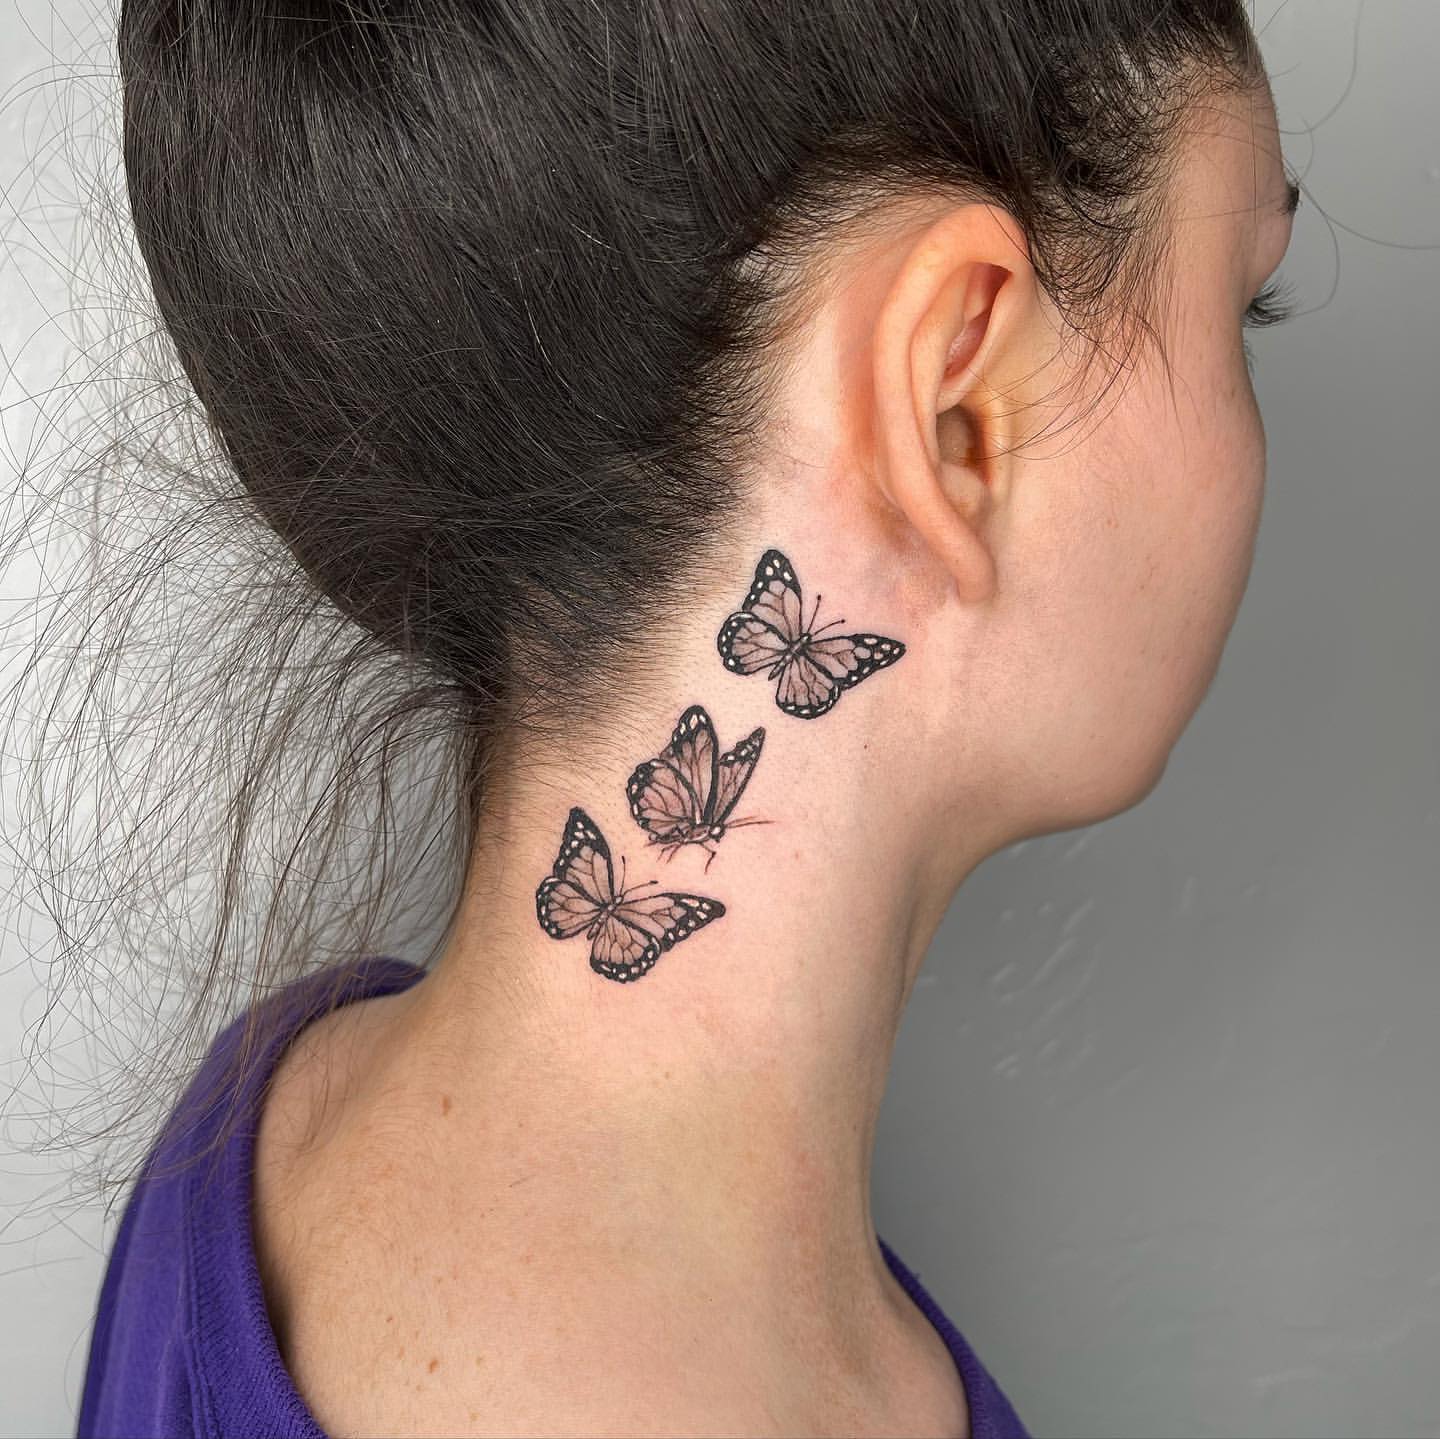 32 Behind The Ear Tattoos That Are Low-key Gorgeous